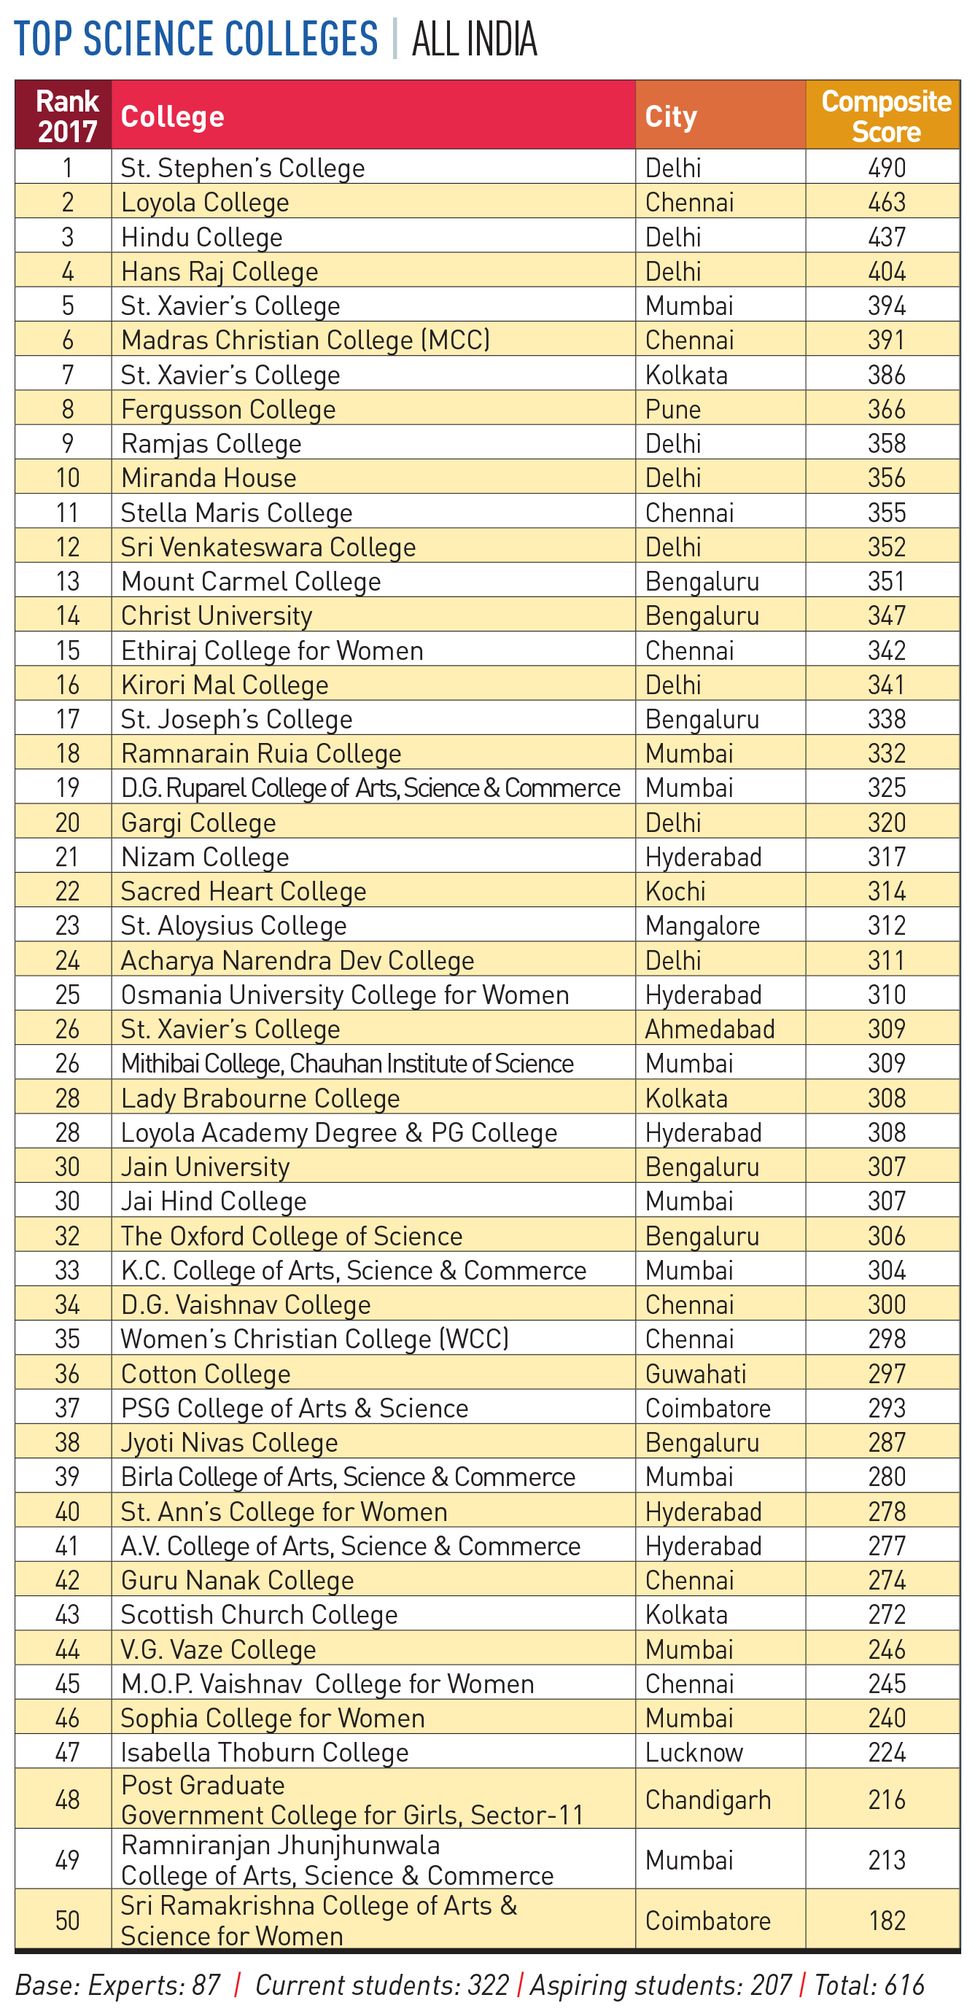 80-SCIENCE-COLLEGES